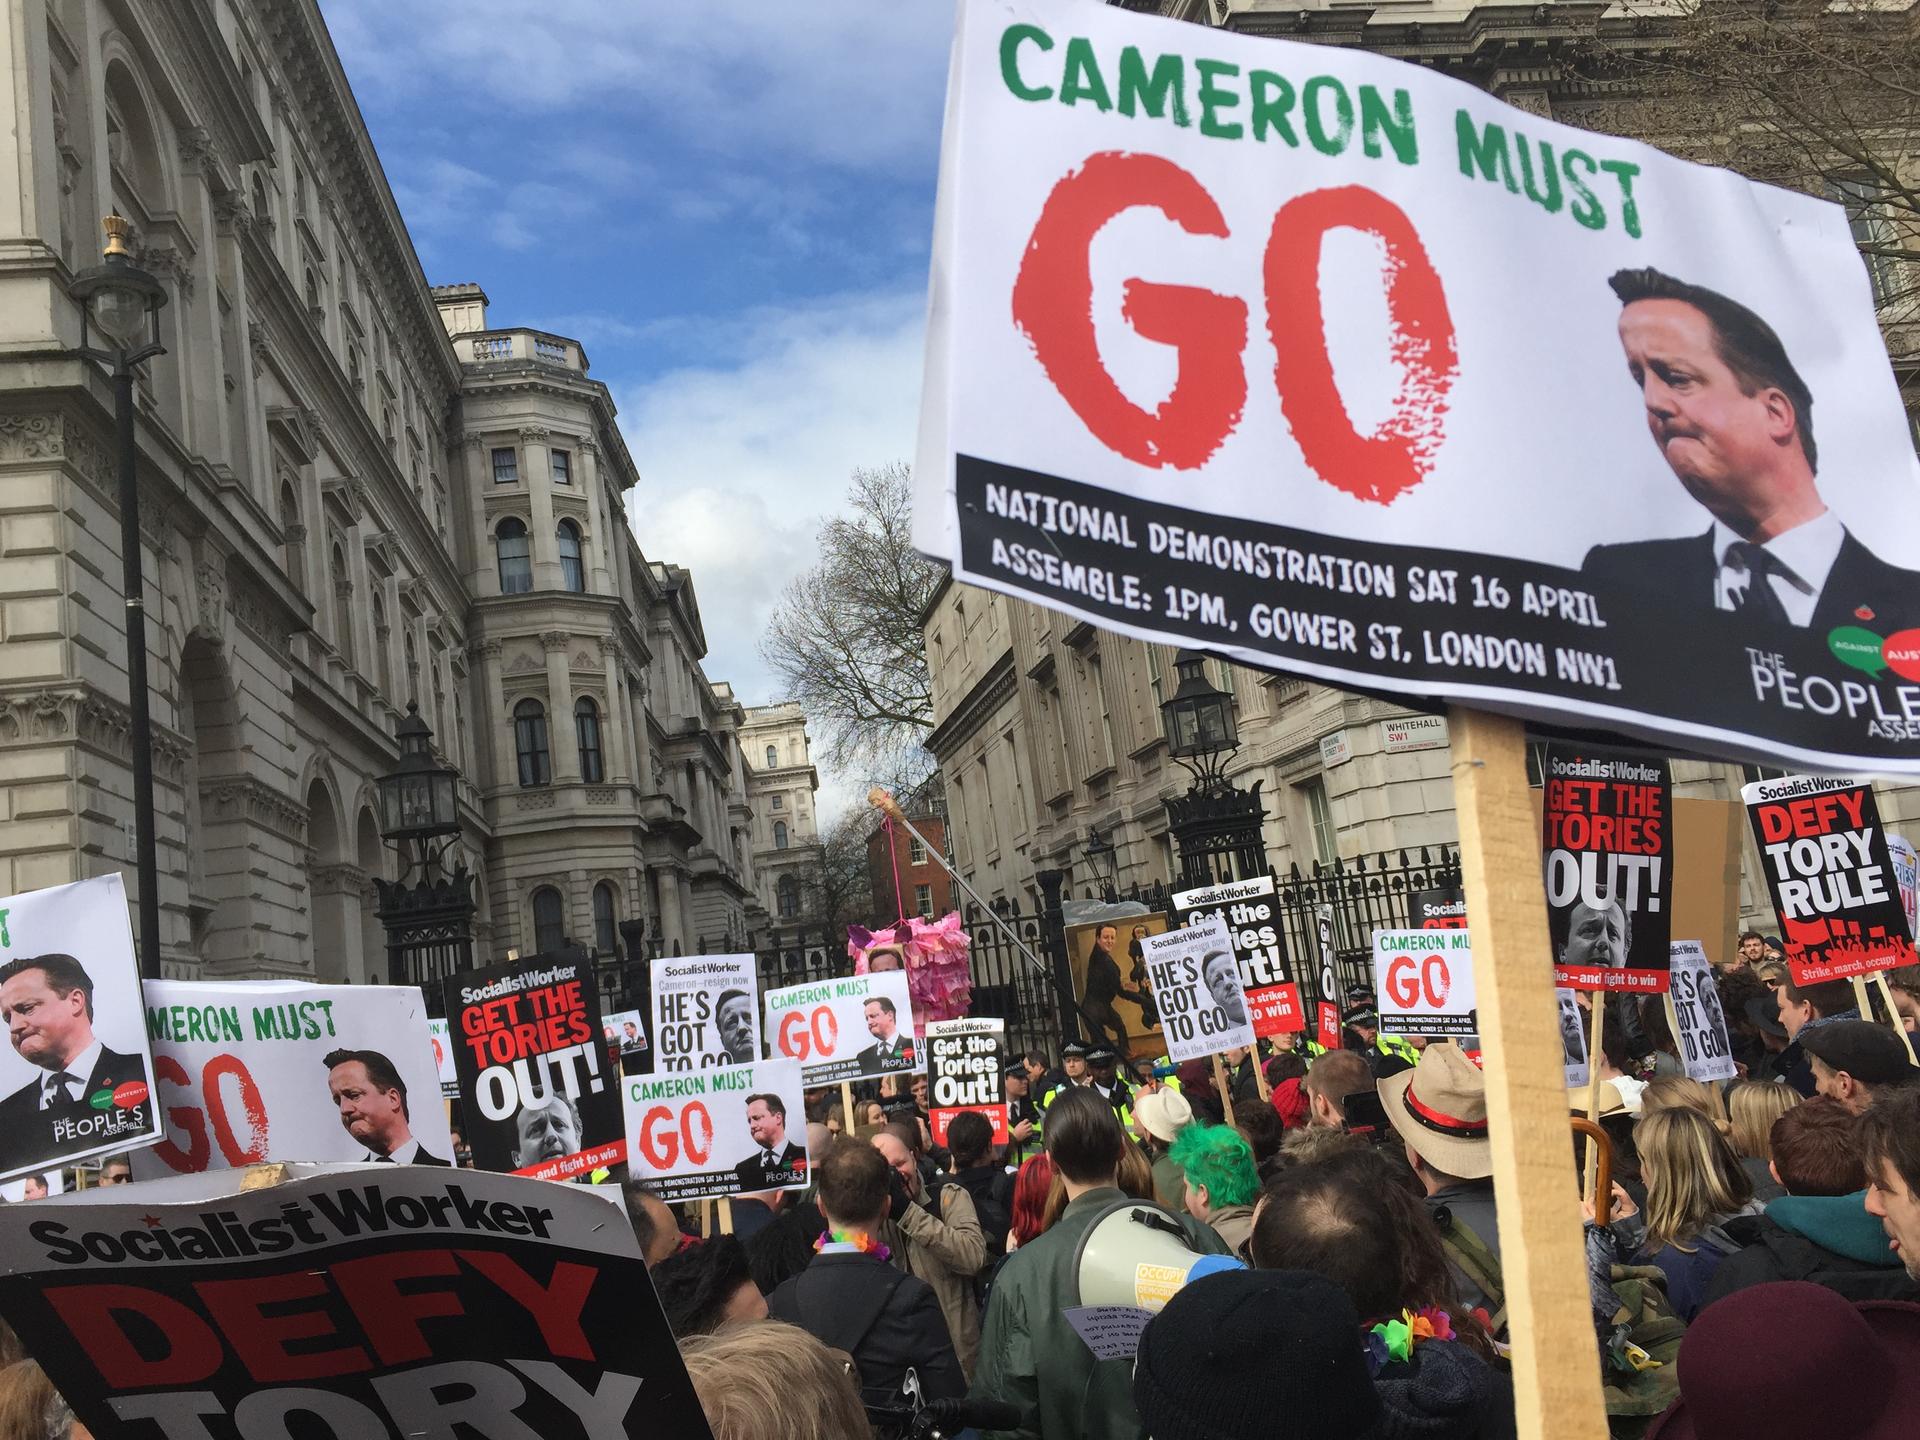 Thousands of people protest outside 10 Downing Street in London calling for the resignation of Prime Minister David Cameron. 